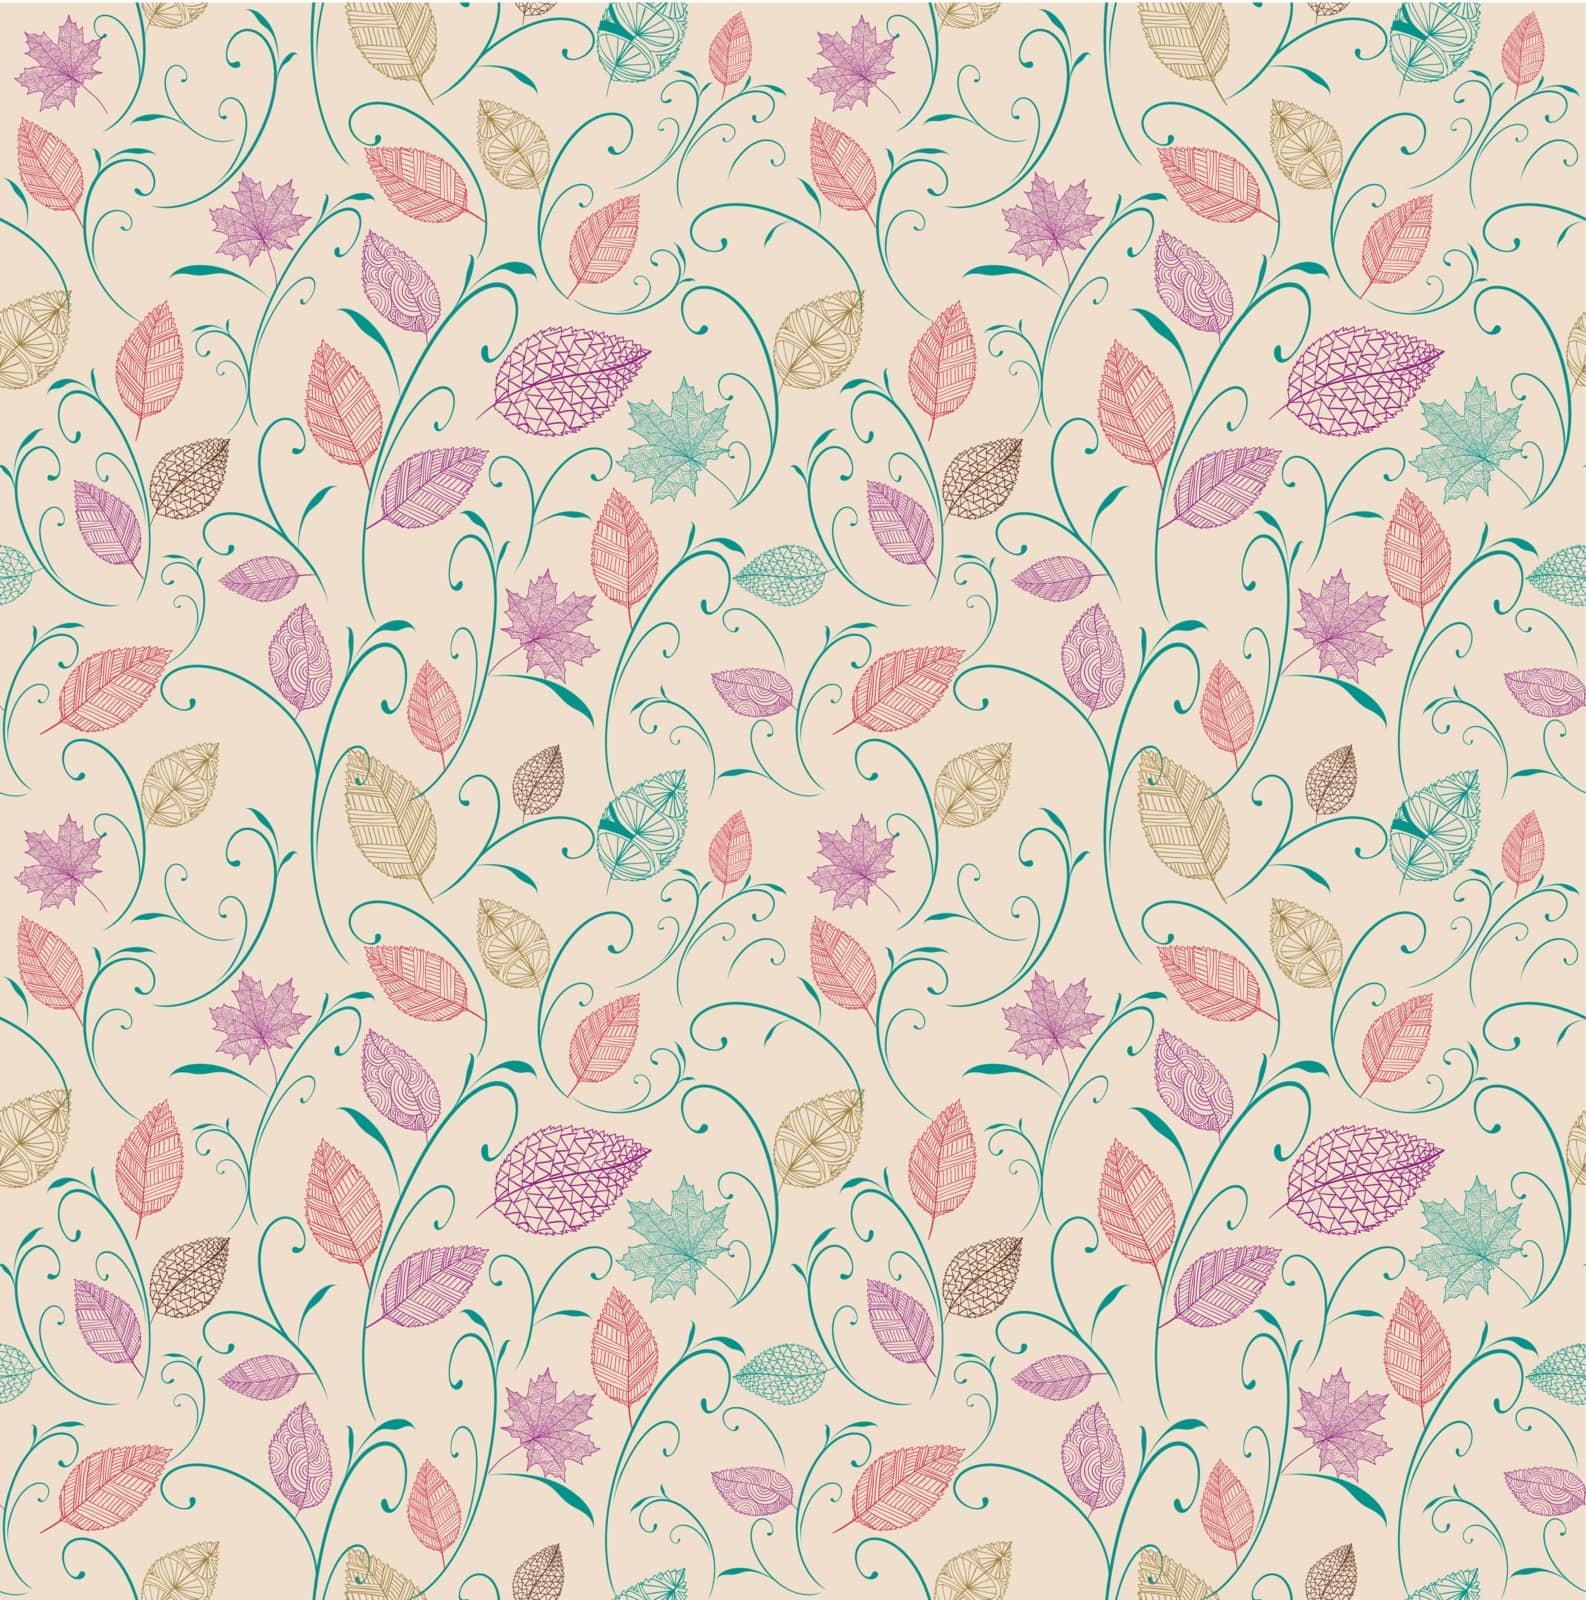 Vintage autumn leaves and branches seamless pattern background. EPS10 vector file with transparency organized in layers for easy editing.